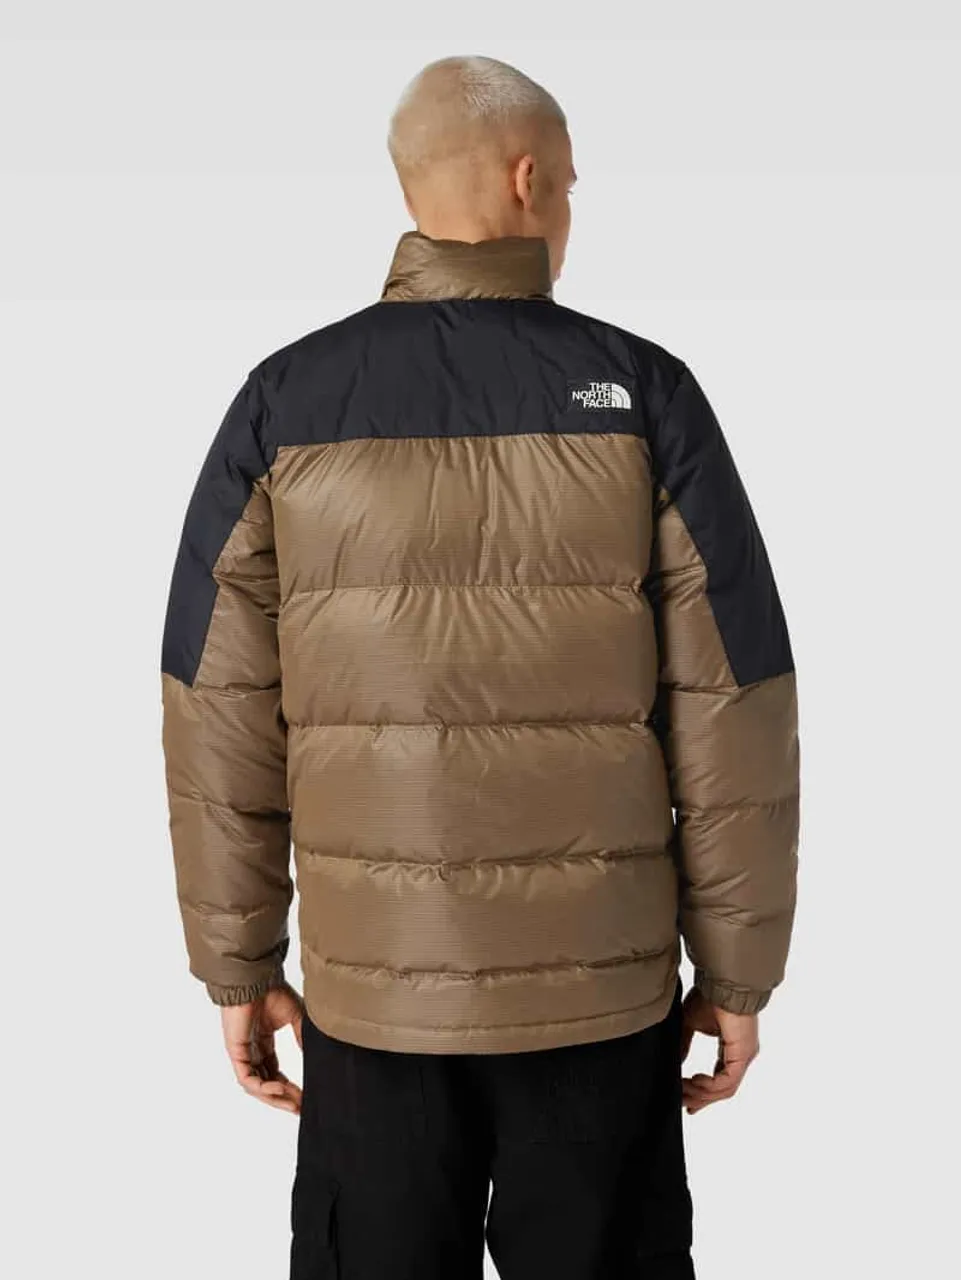 The North Face Daunenjacke mit Label-Patch Modell 'DIABLO' in Camel